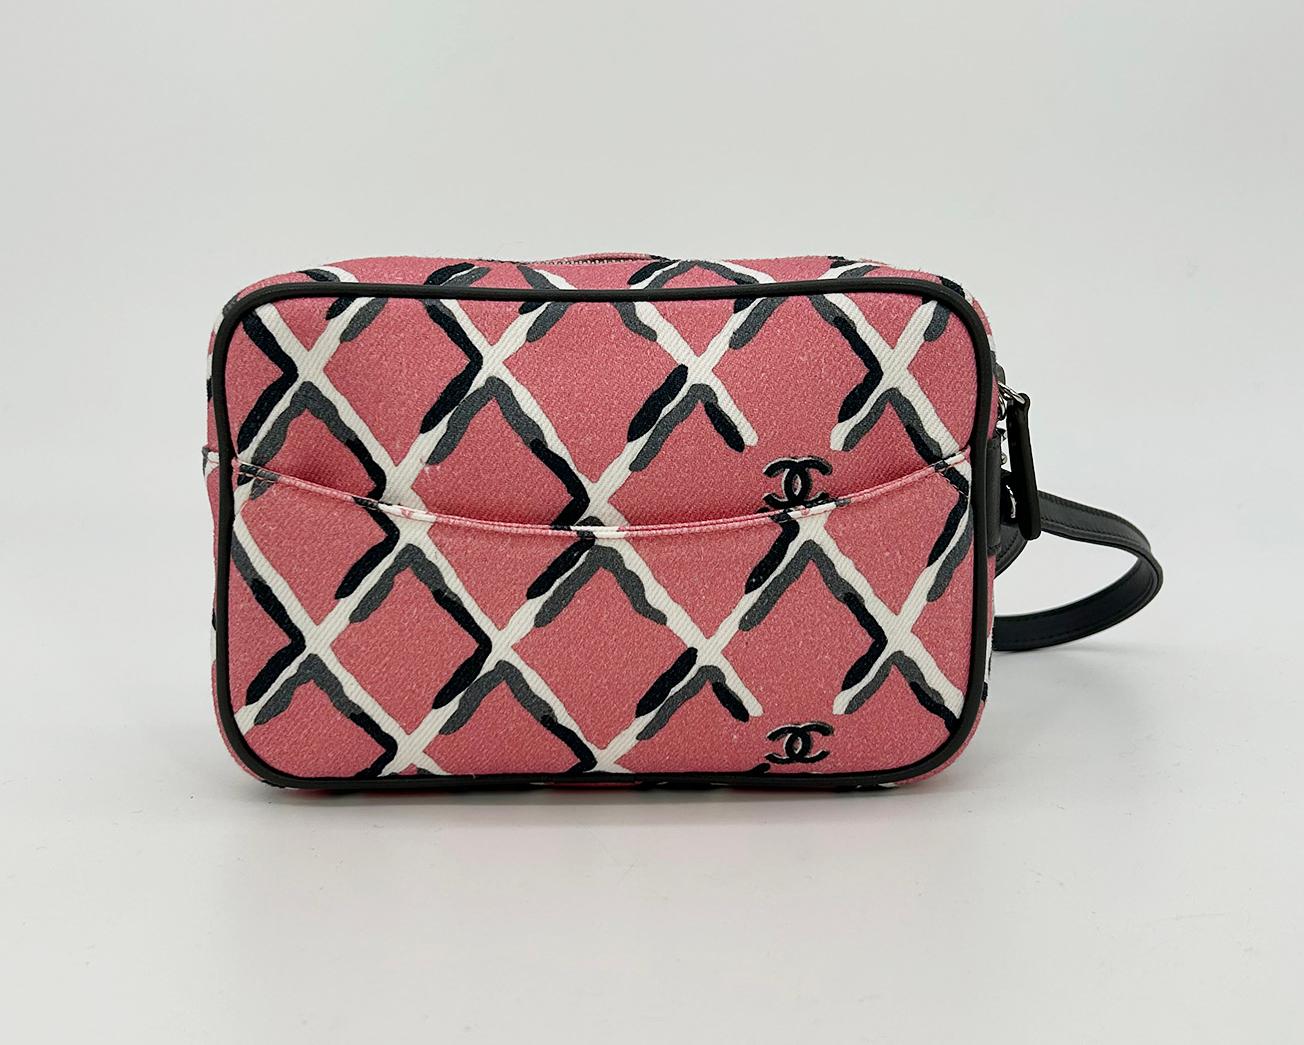 Chanel Coco Pink Canvas Beach Pouch Wristlet in like new condition. Pink printed canvas exterior with black gray and white crosshatch print throughout. Gray leather piping trim and silver hardware. Gray leather wrist strap. Backside exterior slit